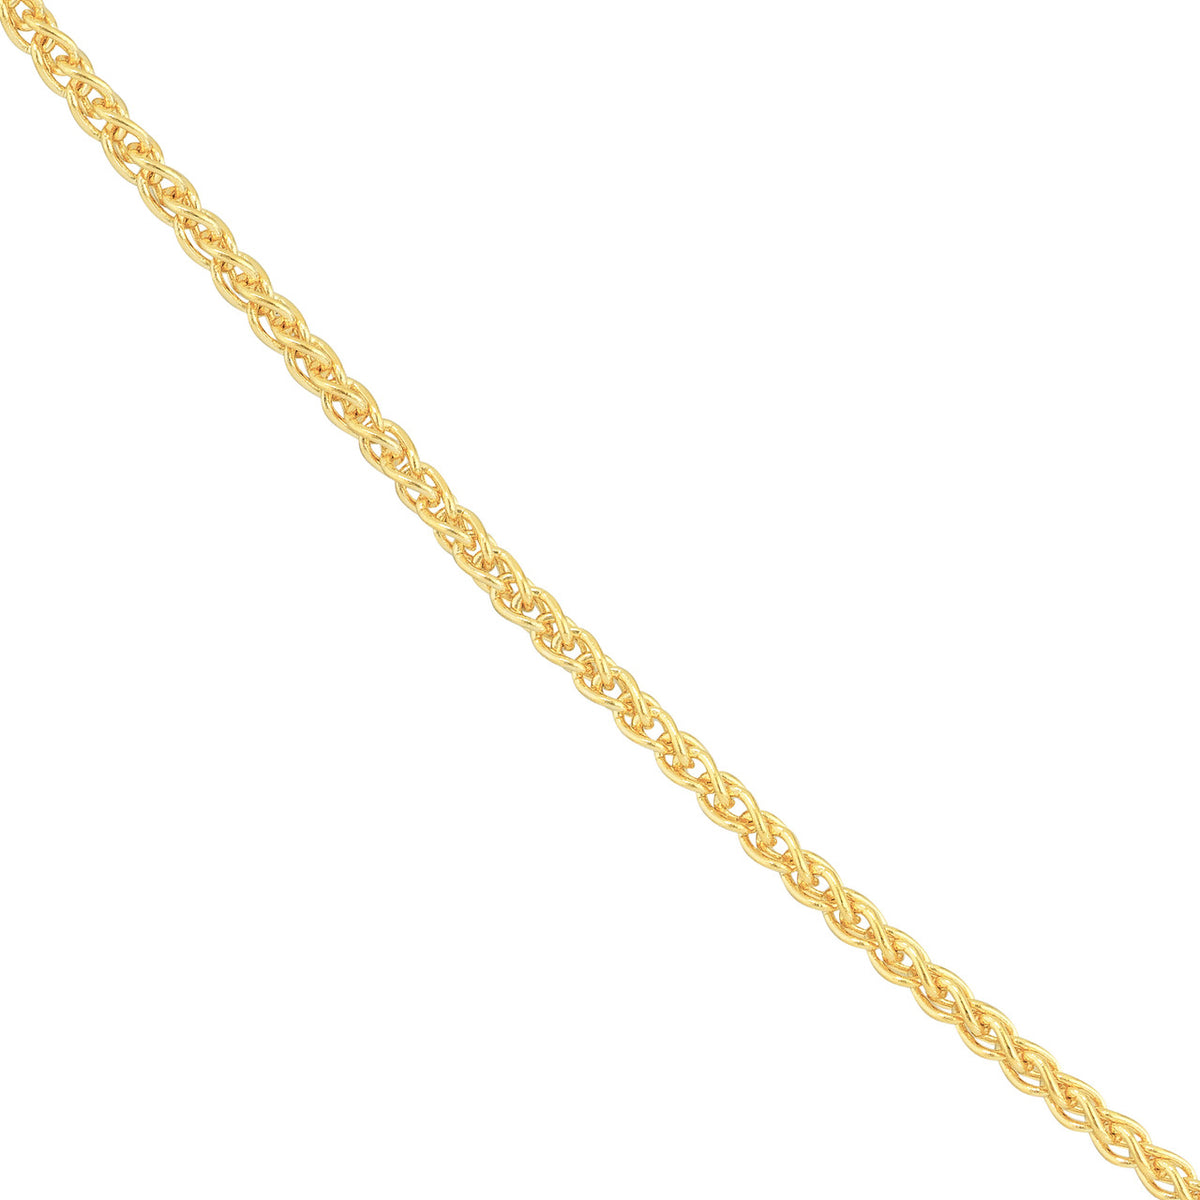 14K Yellow Gold or White Gold 1.5mm Wheat Chain Necklace with Lobster Lock